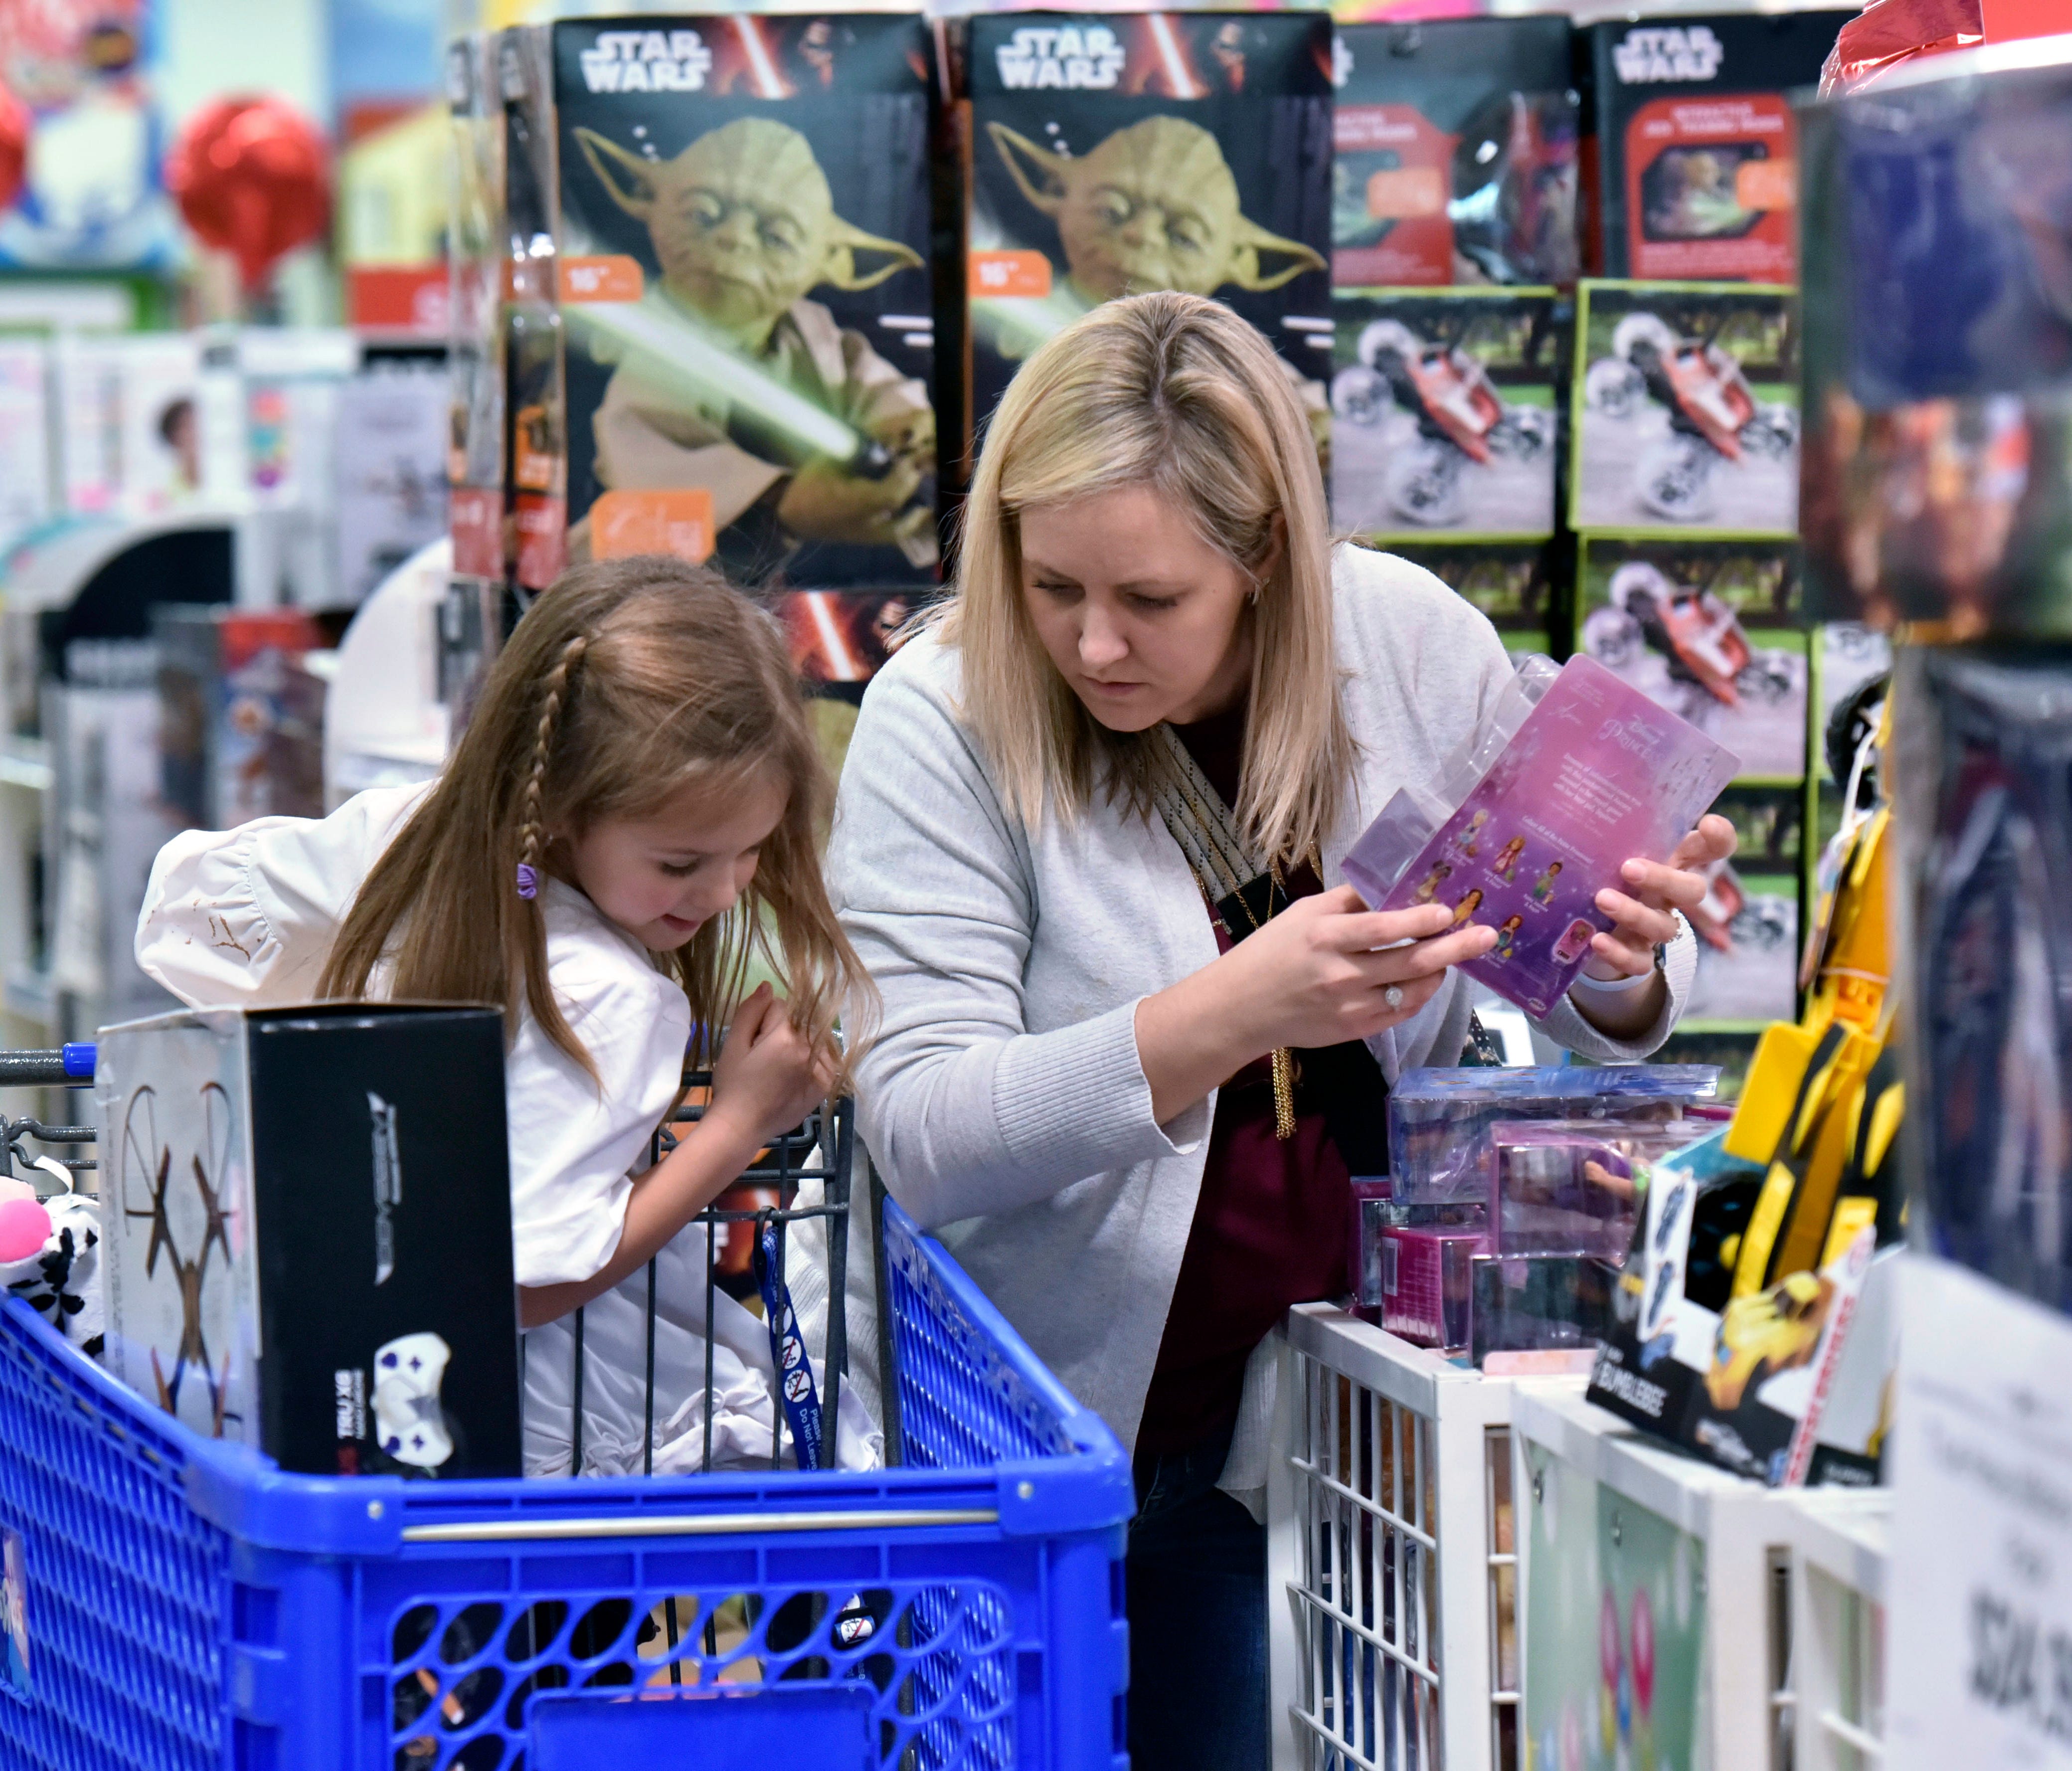 Security experts say parents should exercise caution when purchasing smart toys connected to the internet.